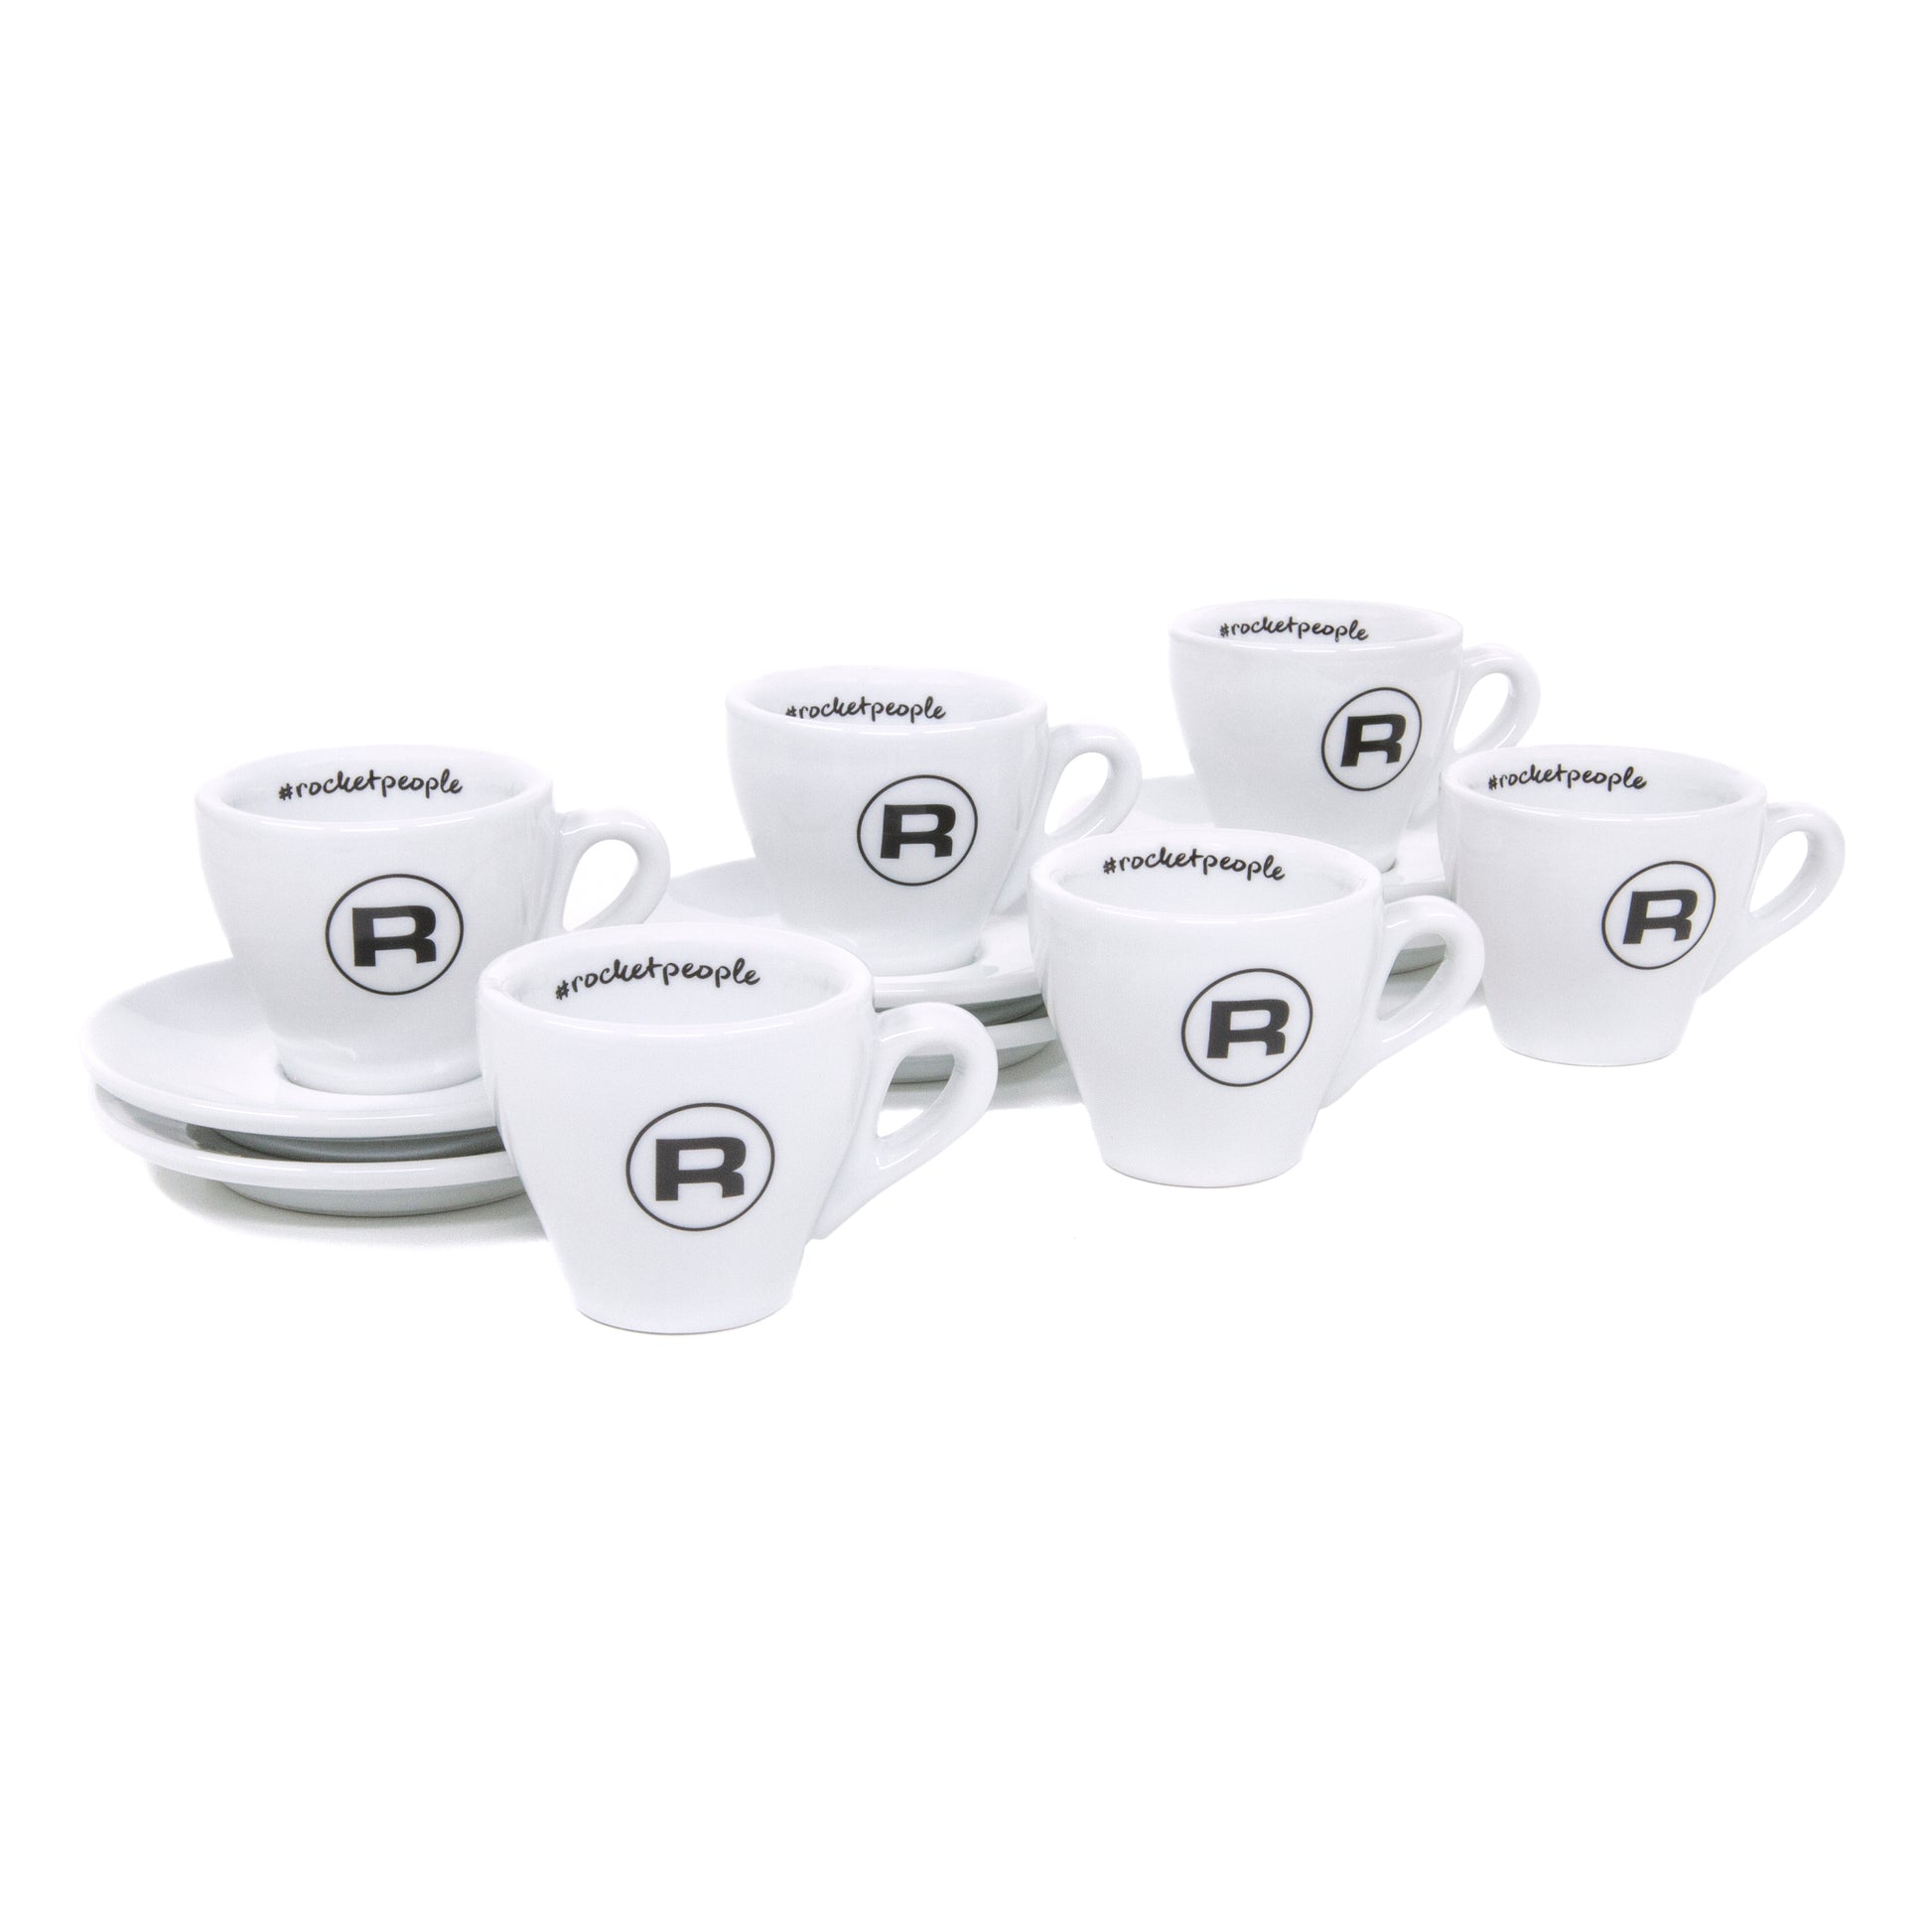 White House Architecture Espresso Cups with Saucers, Set of Two